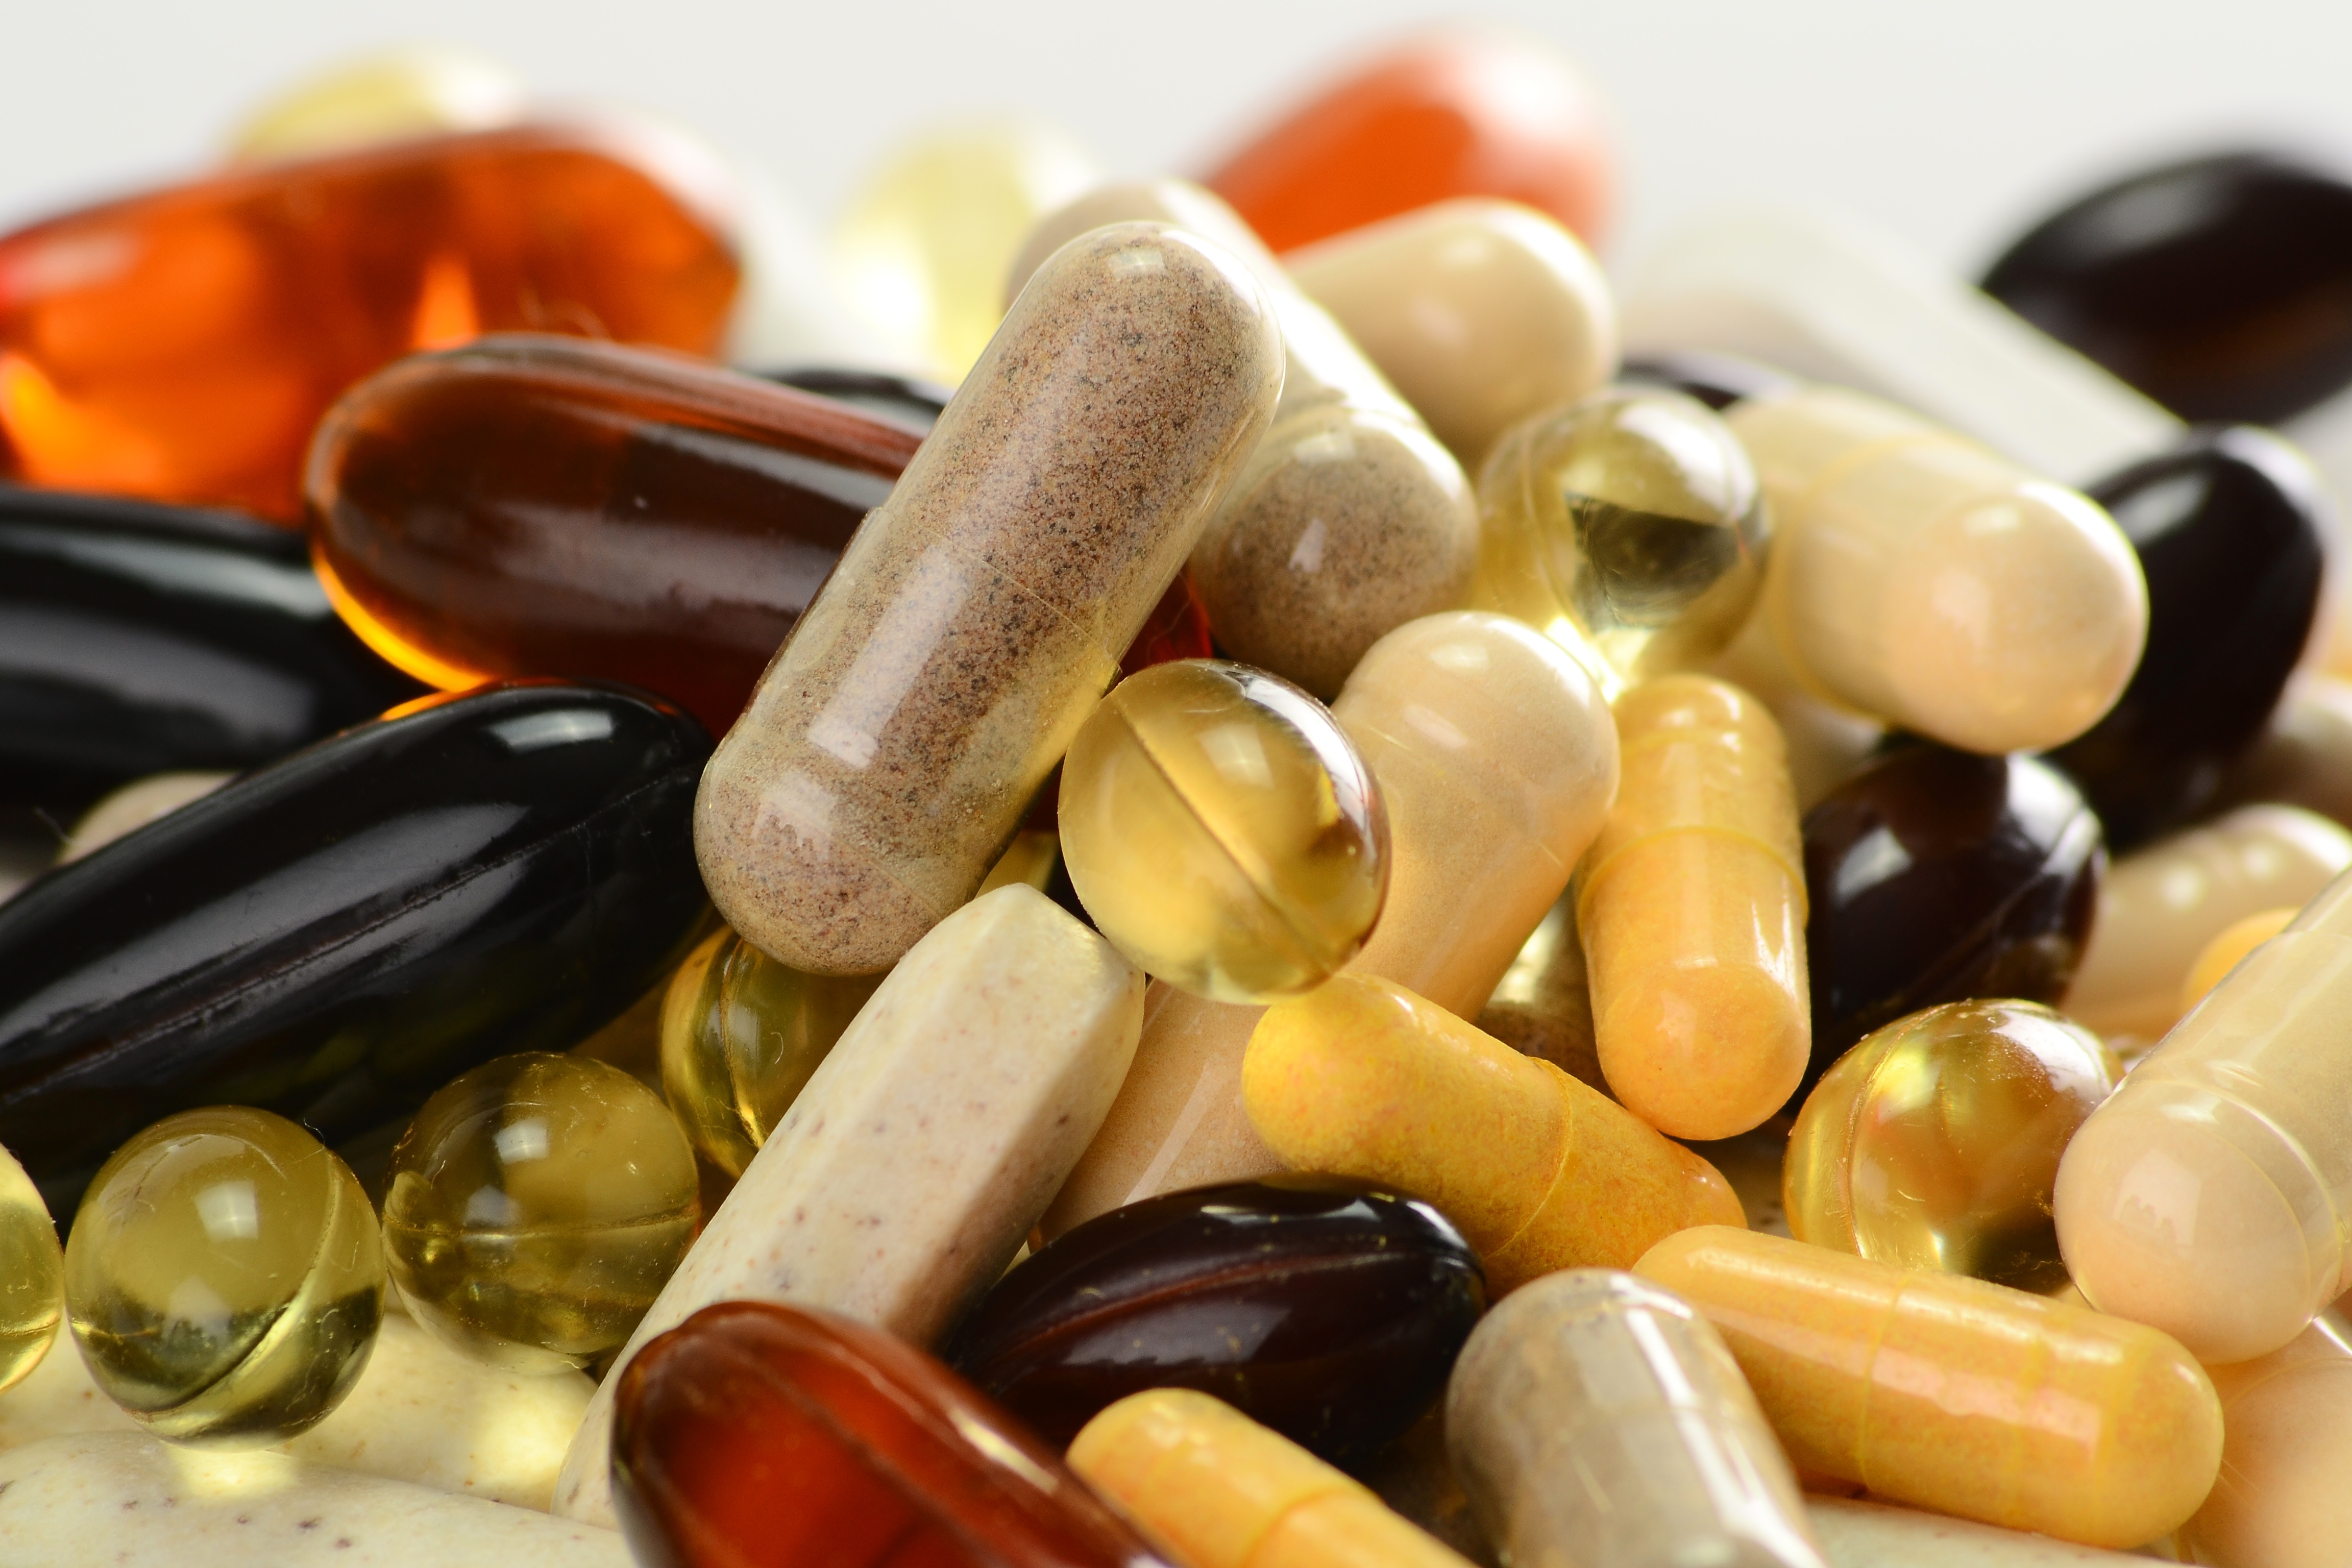 Vitamins and supplements for knee health